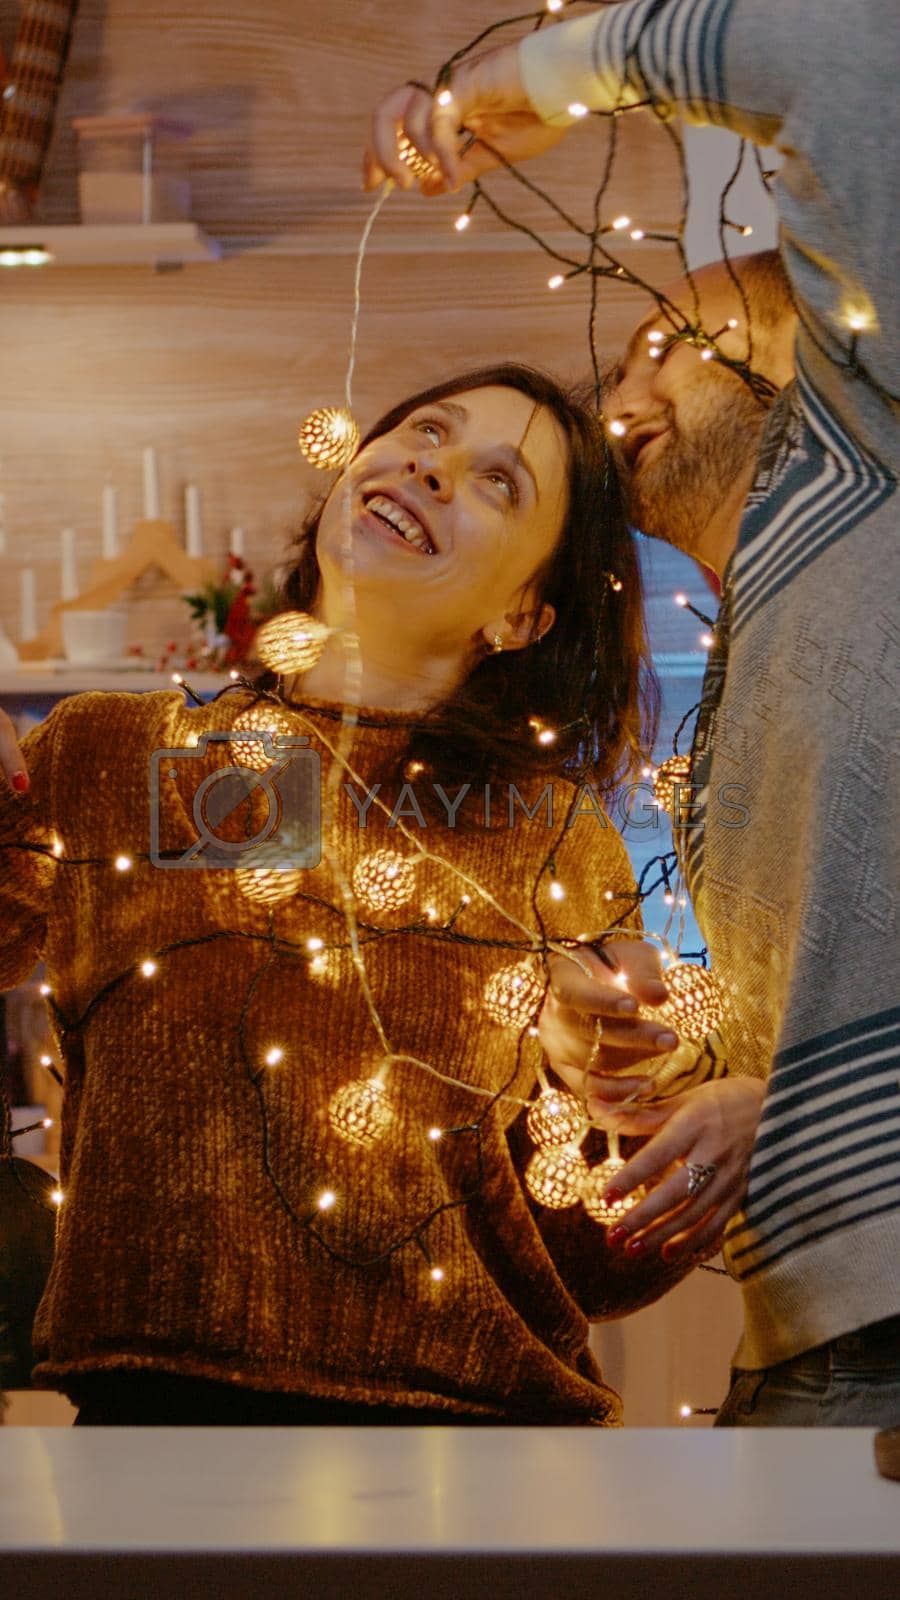 Cheerful people getting tangled in festive lights while decorating home for christmas eve celebration. Man and woman smiling, trying to untangle garland of twinkle lights bulbs.